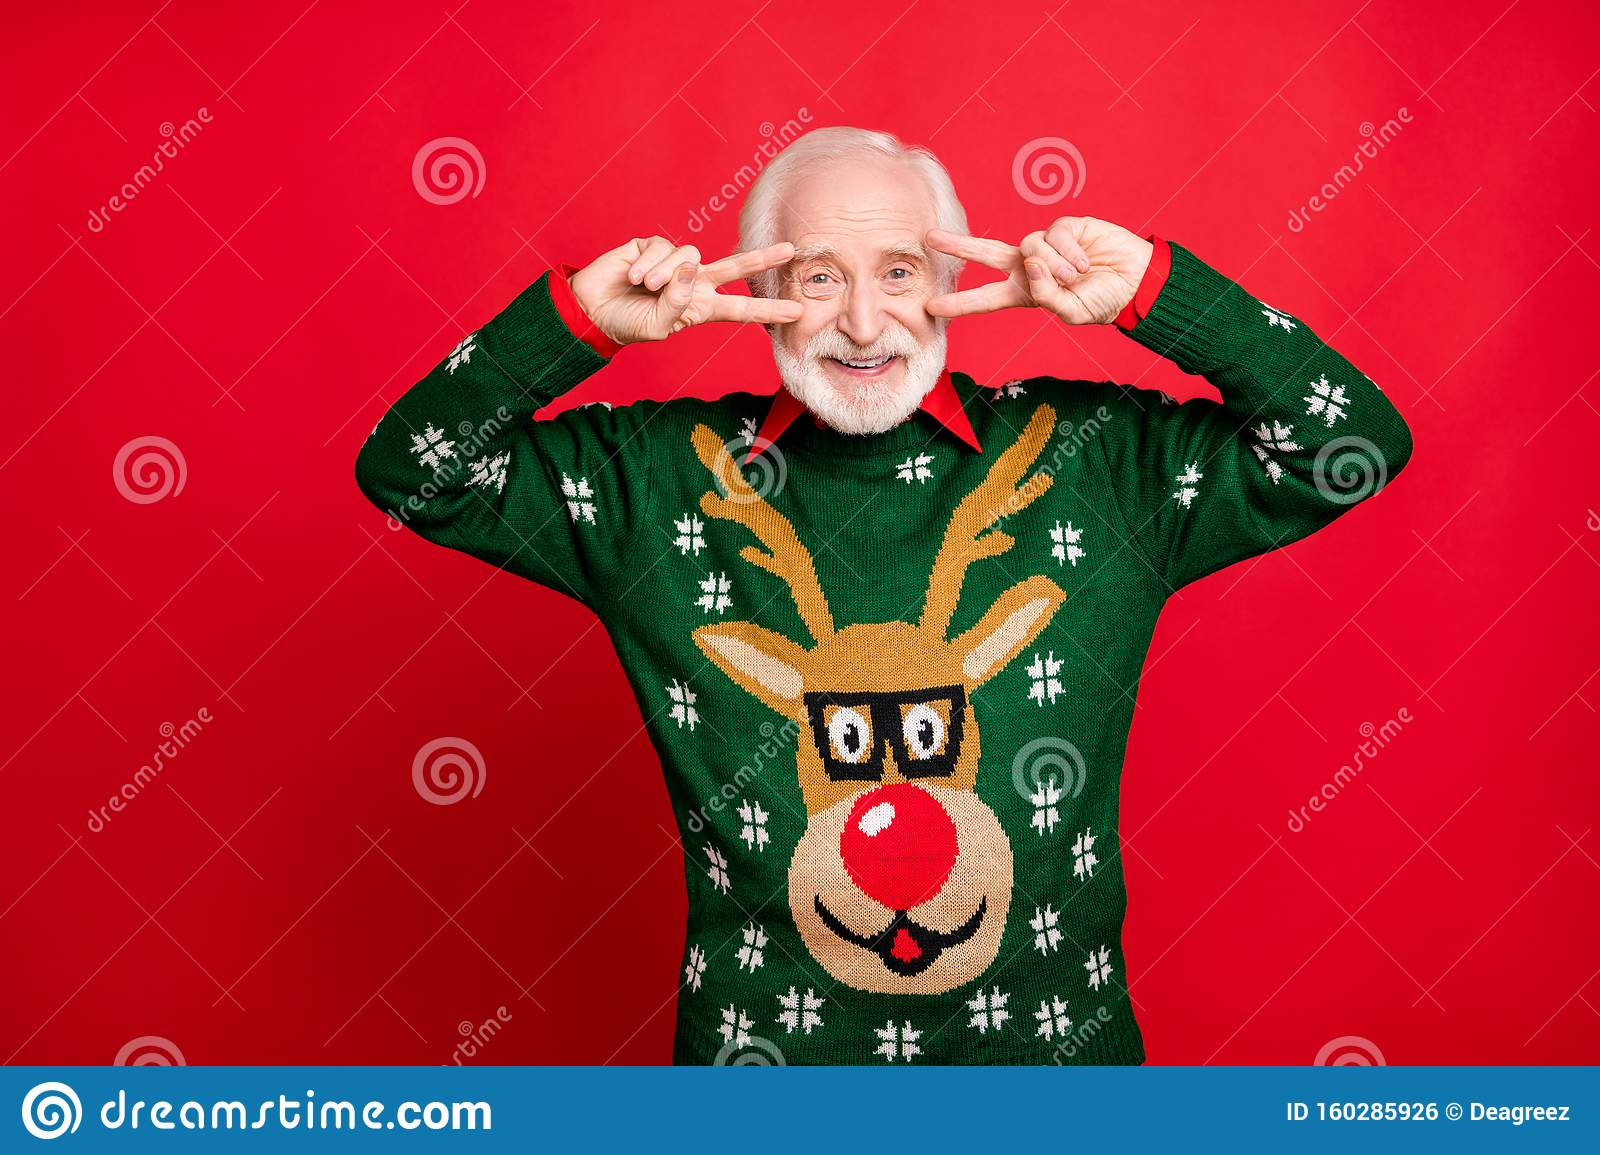 Old Fashioned Christmas Party Ideas
 Portrait Positive Cheerful Funky Old Man Enjoy